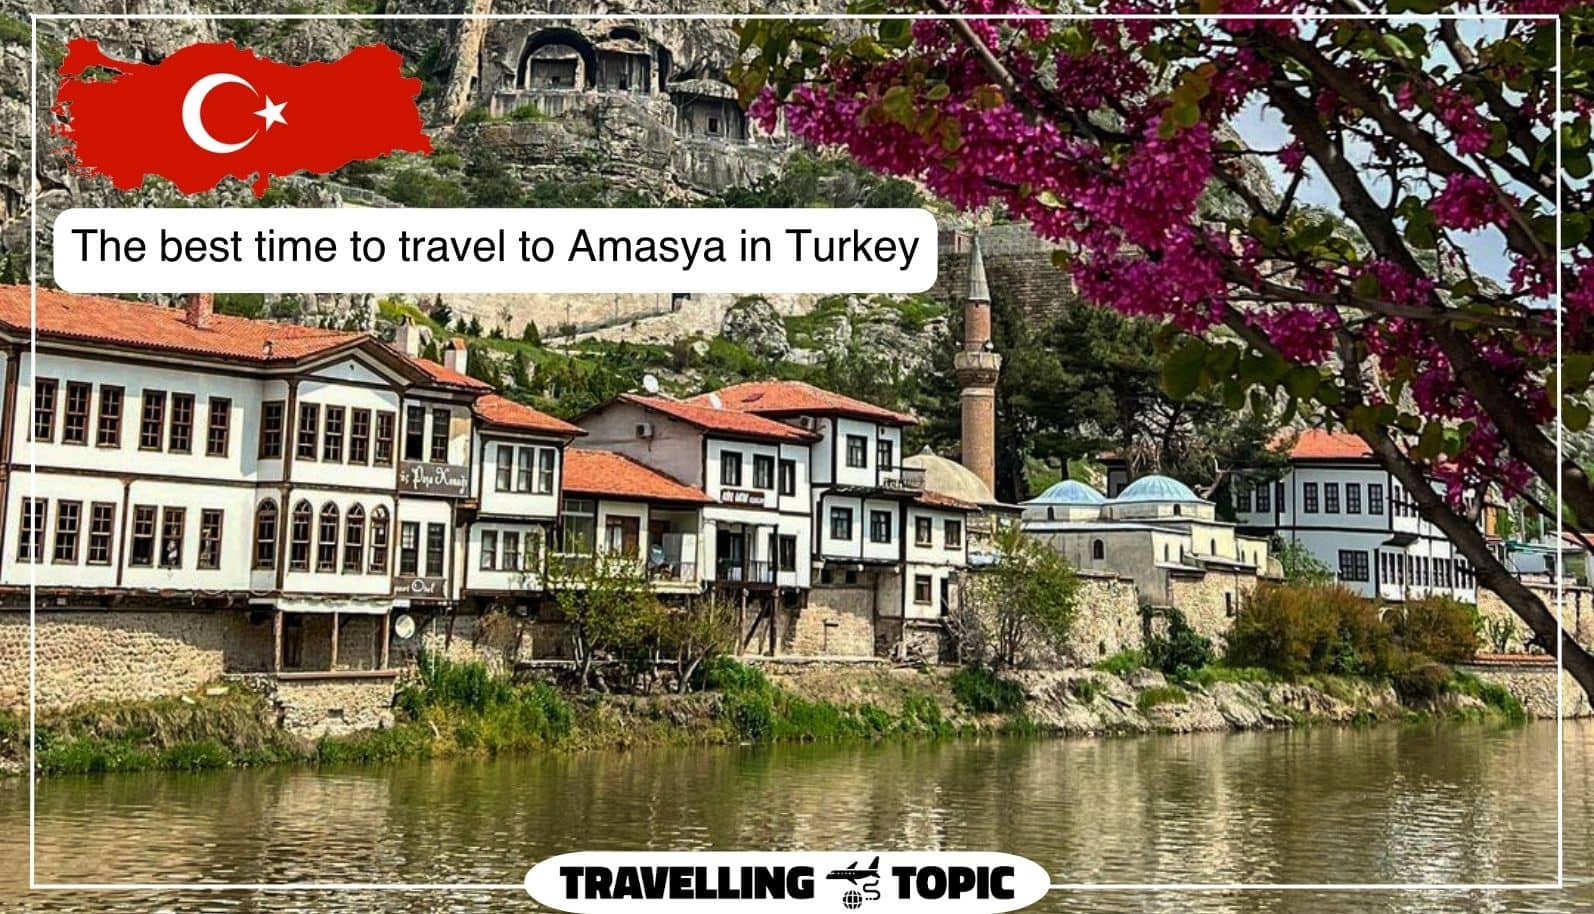 The best time to travel to Amasya in Turkey